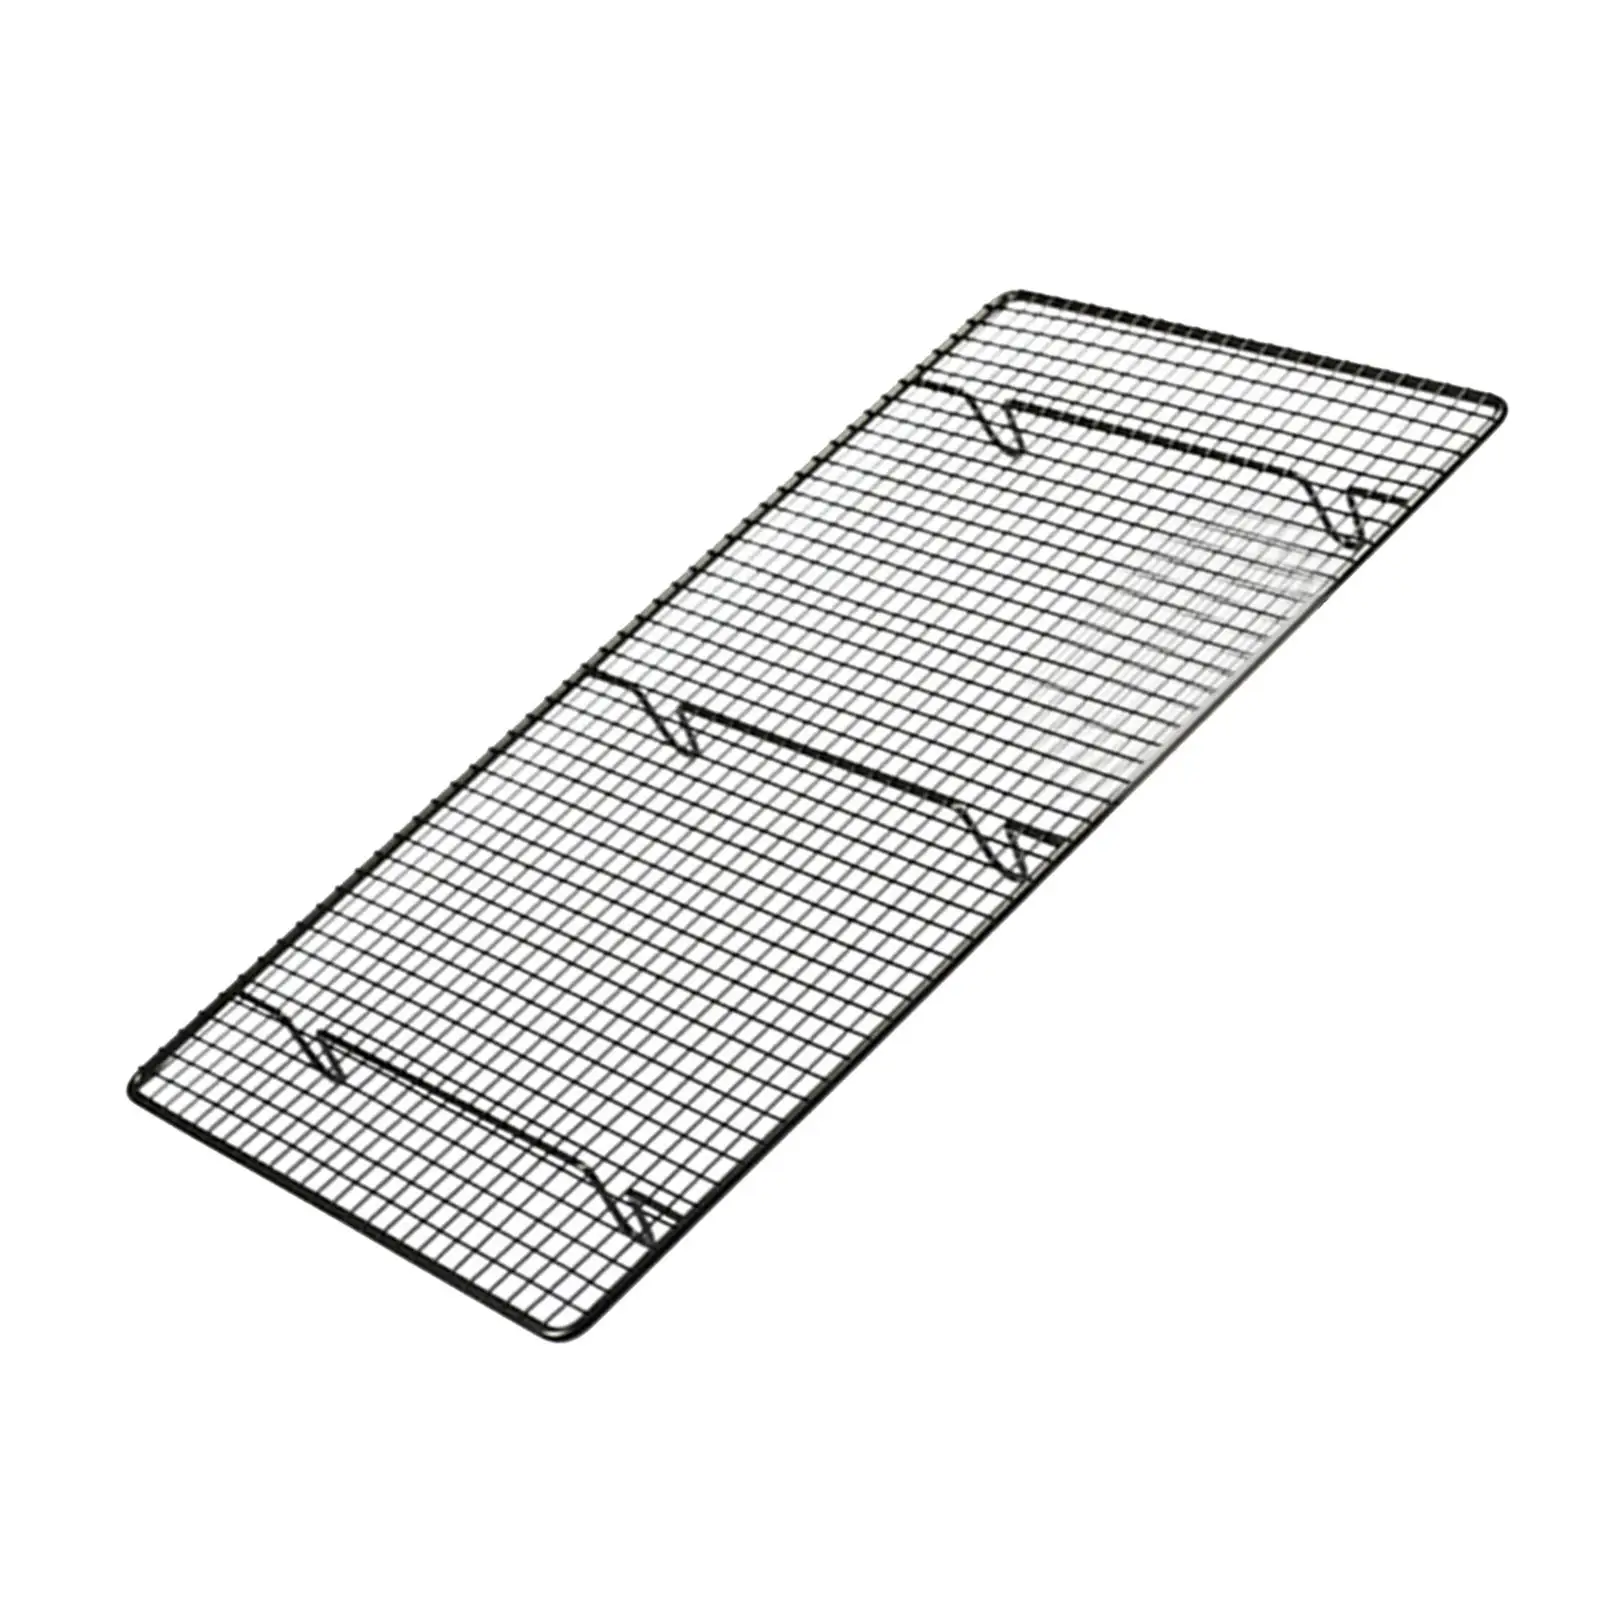 Cold Drying Net, Grid Cooling Tray, Picnic Baking Nonstick Wire Mesh Net, Wire Baking Rack Multipurpose